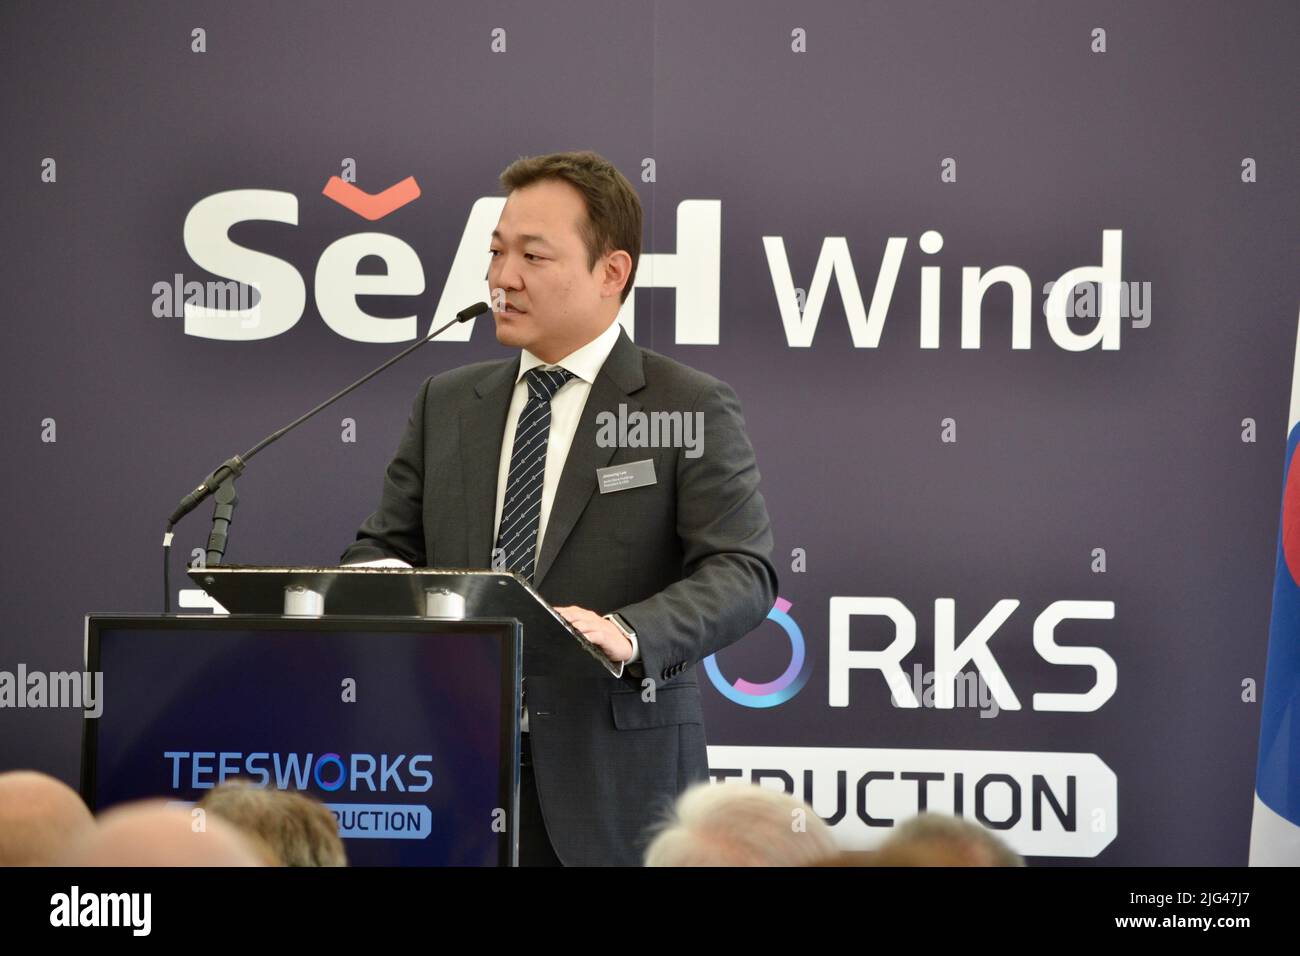 Redcar, UK. 07 Jul 2022. Construction has started on SeAH Wind Ltd’s offshore wind facility marking the first major private sector investment beginning construction at a UK Freeport. President & CEO of SeAH Steel Holdings Joosung Lee (pictured) took part in an official Signing Ceremony, presentations and the ground breaking for the £400million facility, with more than 200 local business leaders also attending. Credit: Teesside Snapper/Alamy Live News Stock Photo